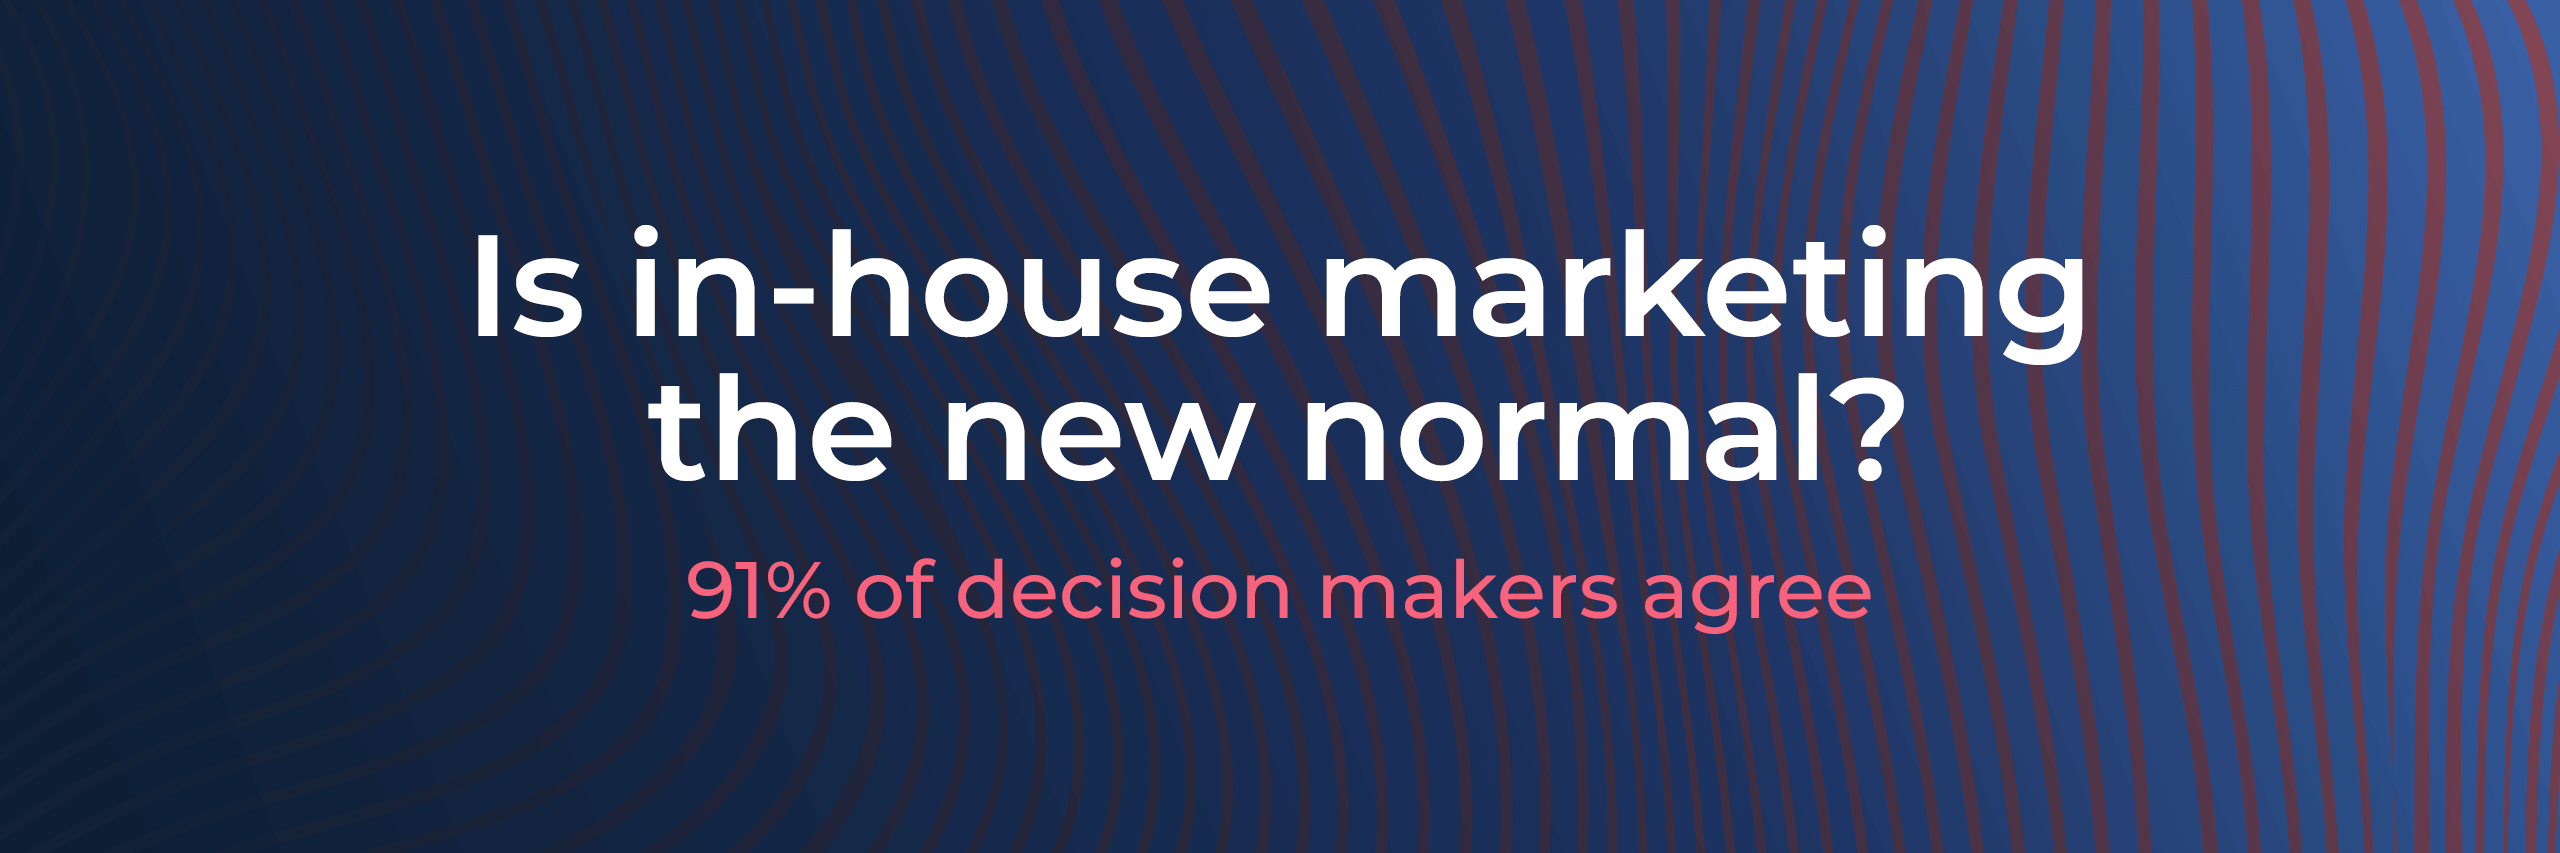 Is in-house marketing the new normal? 91% of decision makers agree